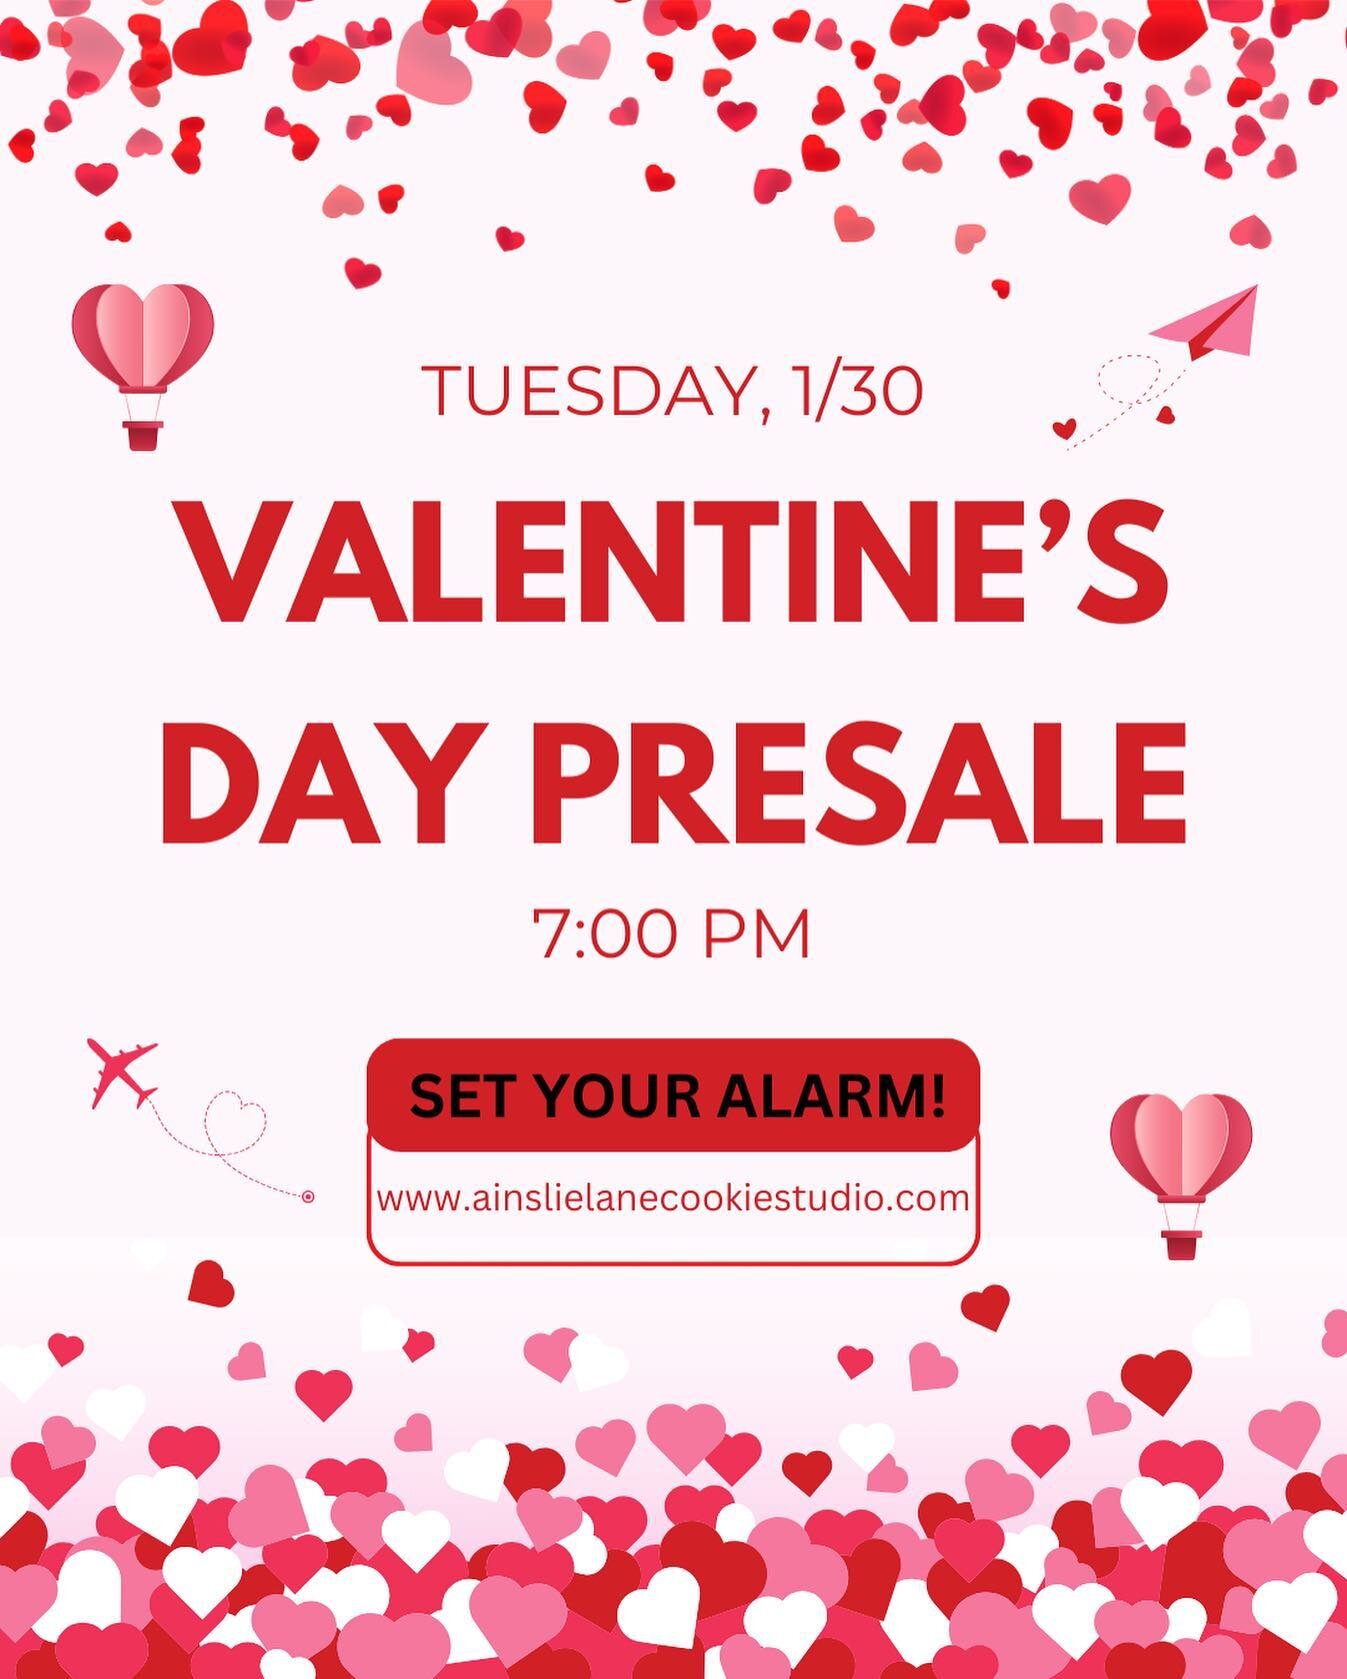 🍪✨ Exciting News! Our Valentine&rsquo;s Day ❤️decorated cookie preorders are opening this Tuesday, 1/30, at 7:00 PM! 💕🎉 Visit our website to spread the love with these delicious treats. Limited quantities available, so set your alarms! ⏰ 

Are you